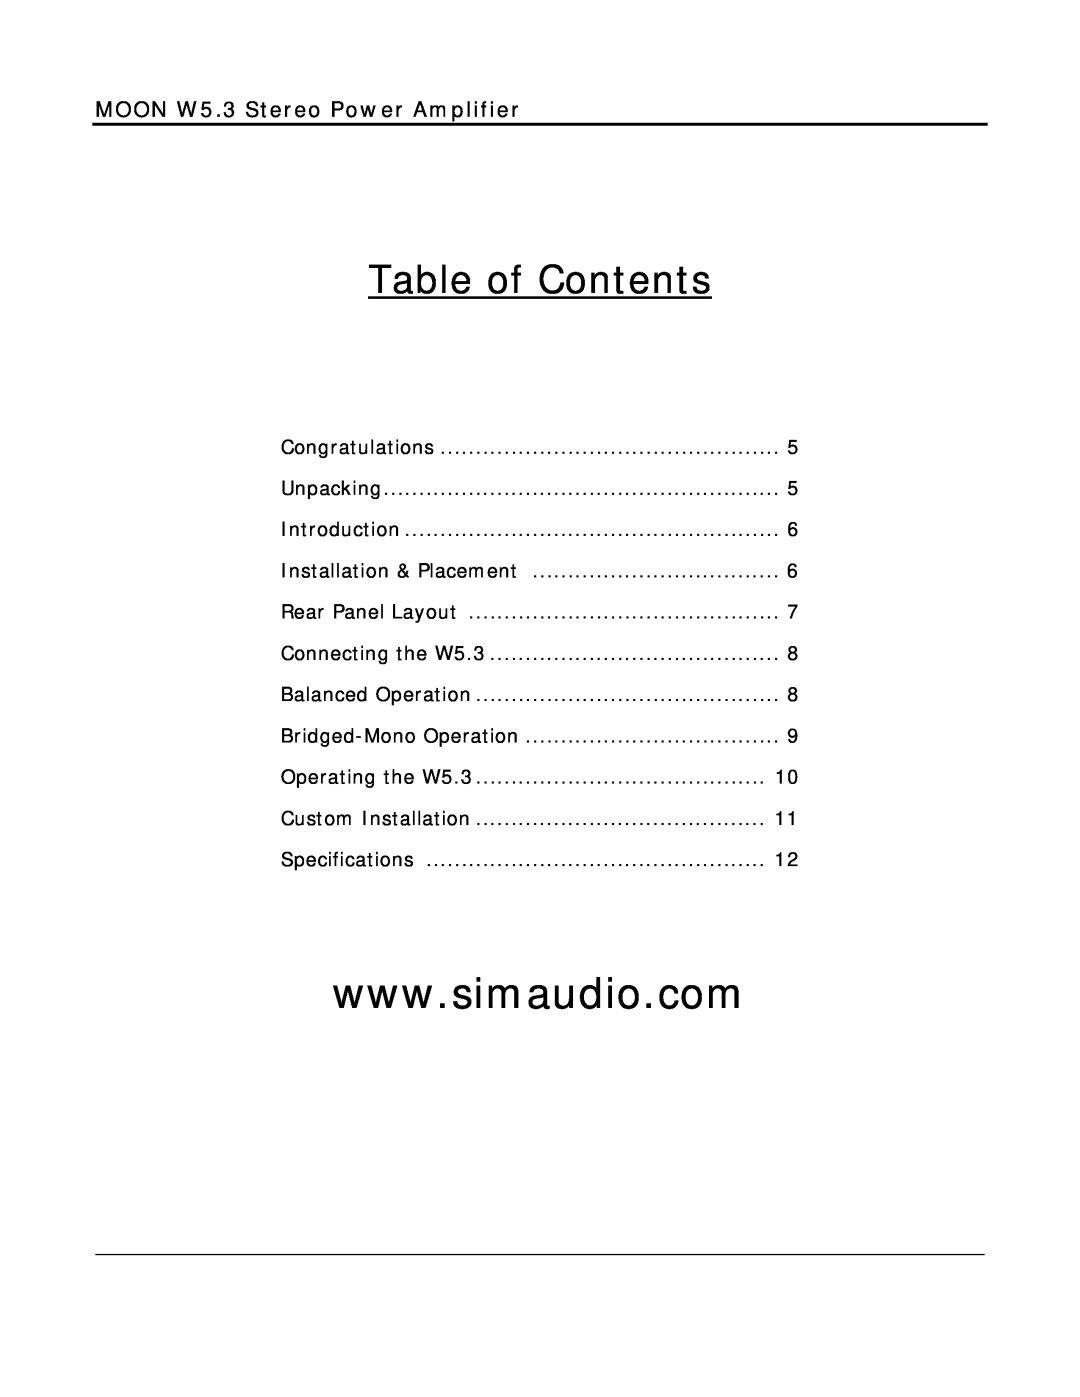 Simaudio owner manual Table of Contents, MOON W5.3 Stereo Power Amplifier 